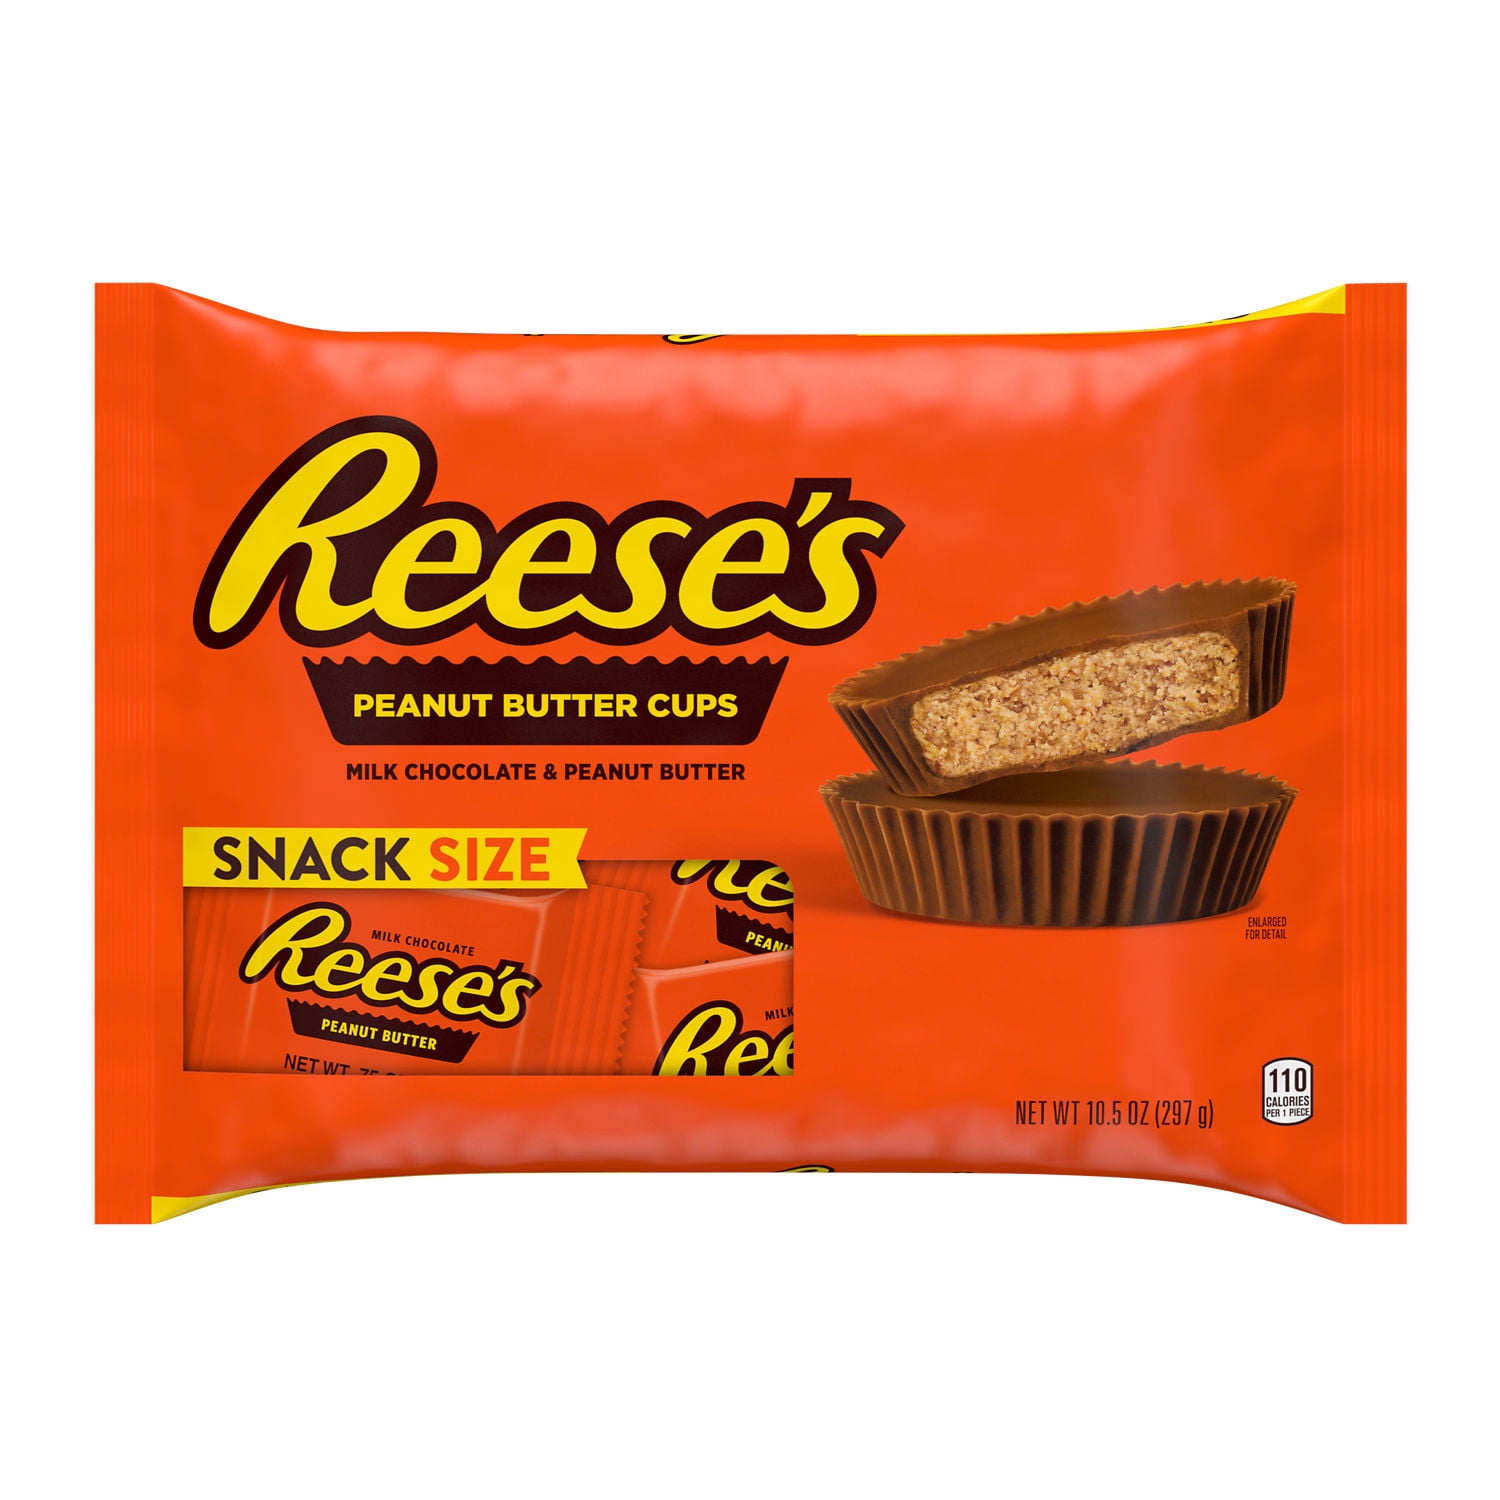 REESE'S Milk Chocolate Peanut Butter Snack Size, Easter Cups Candy Bag, 10.5 oz